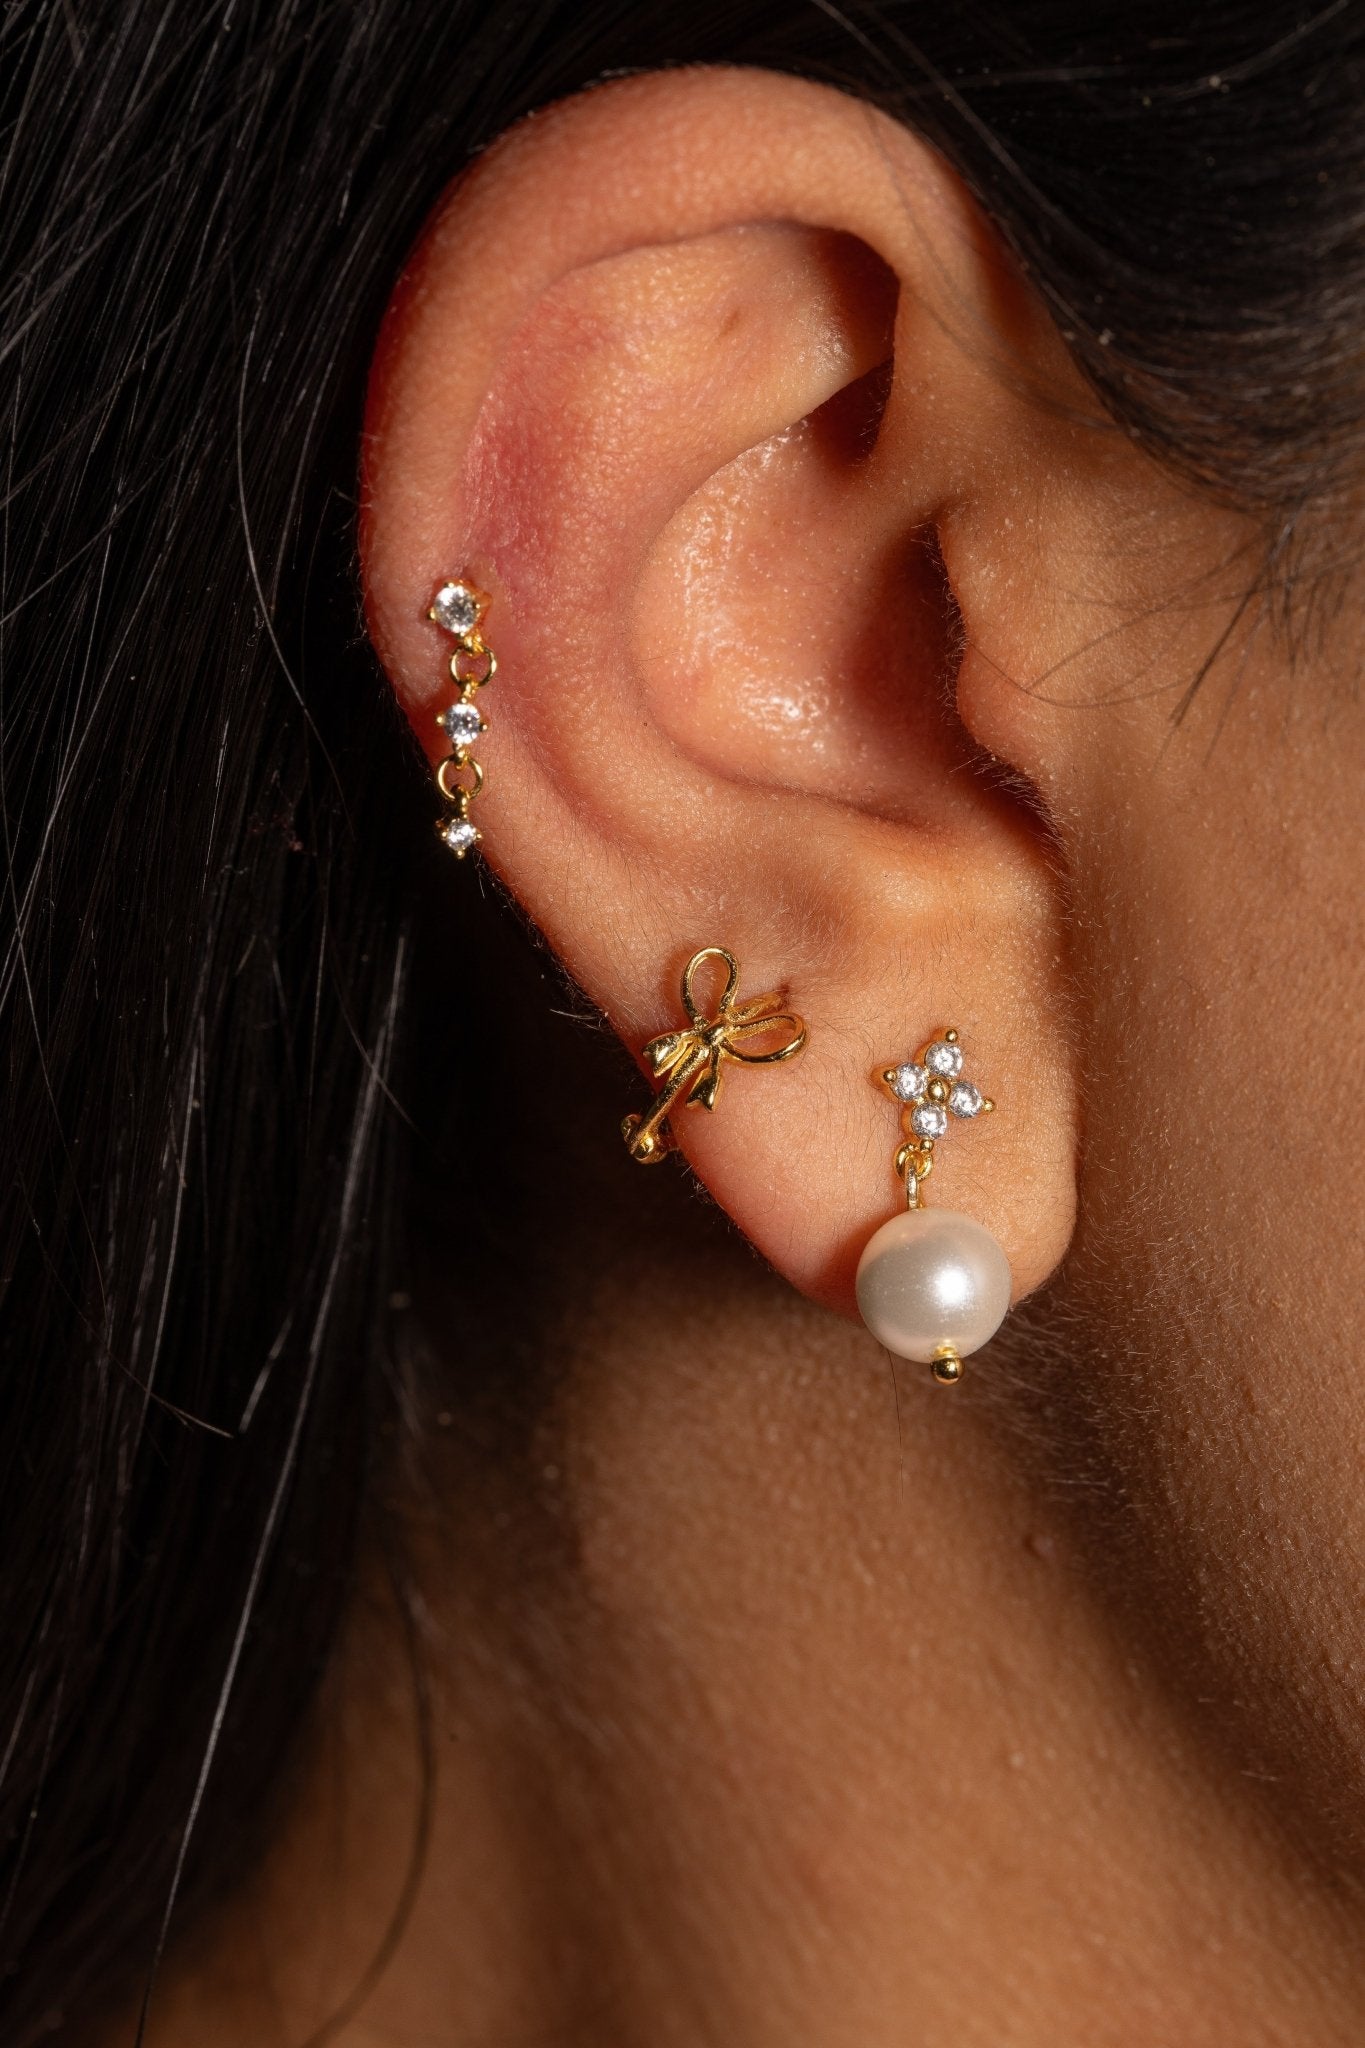 Lucky charm pearl studs gold - Smoothie London - Sterling Silver